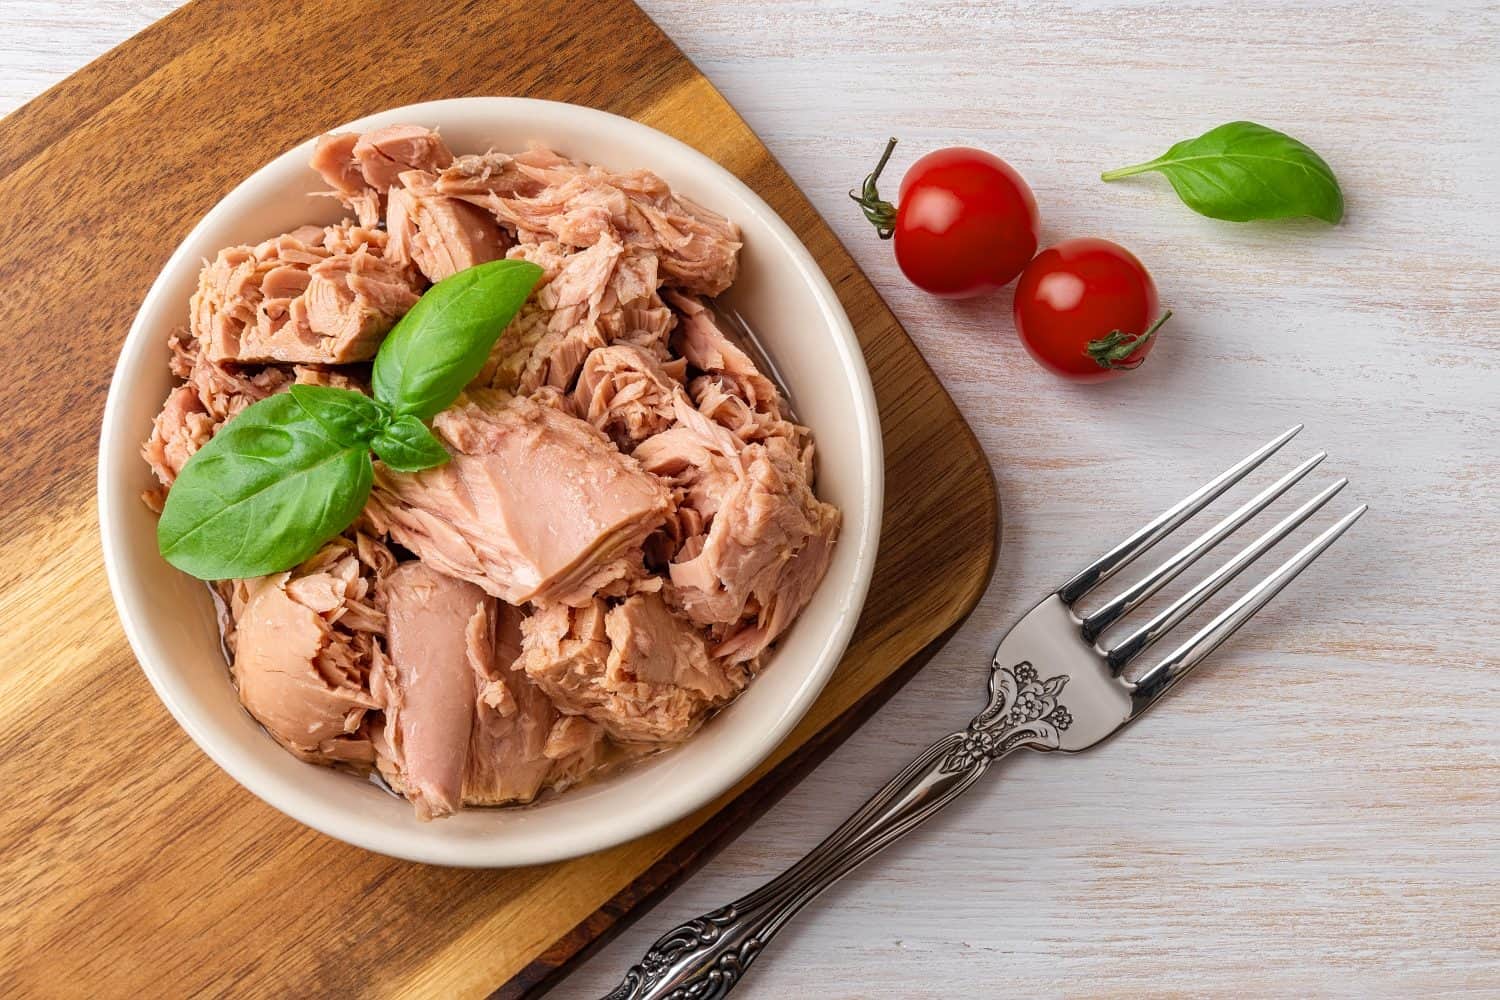 Top view of canned tuna in a bowl, fork and red cherry tomatoes on a white wooden table. Healthy eating snack of preserved tuna meat and fresh vegetables. Low calories tasty seafood. Close-up.